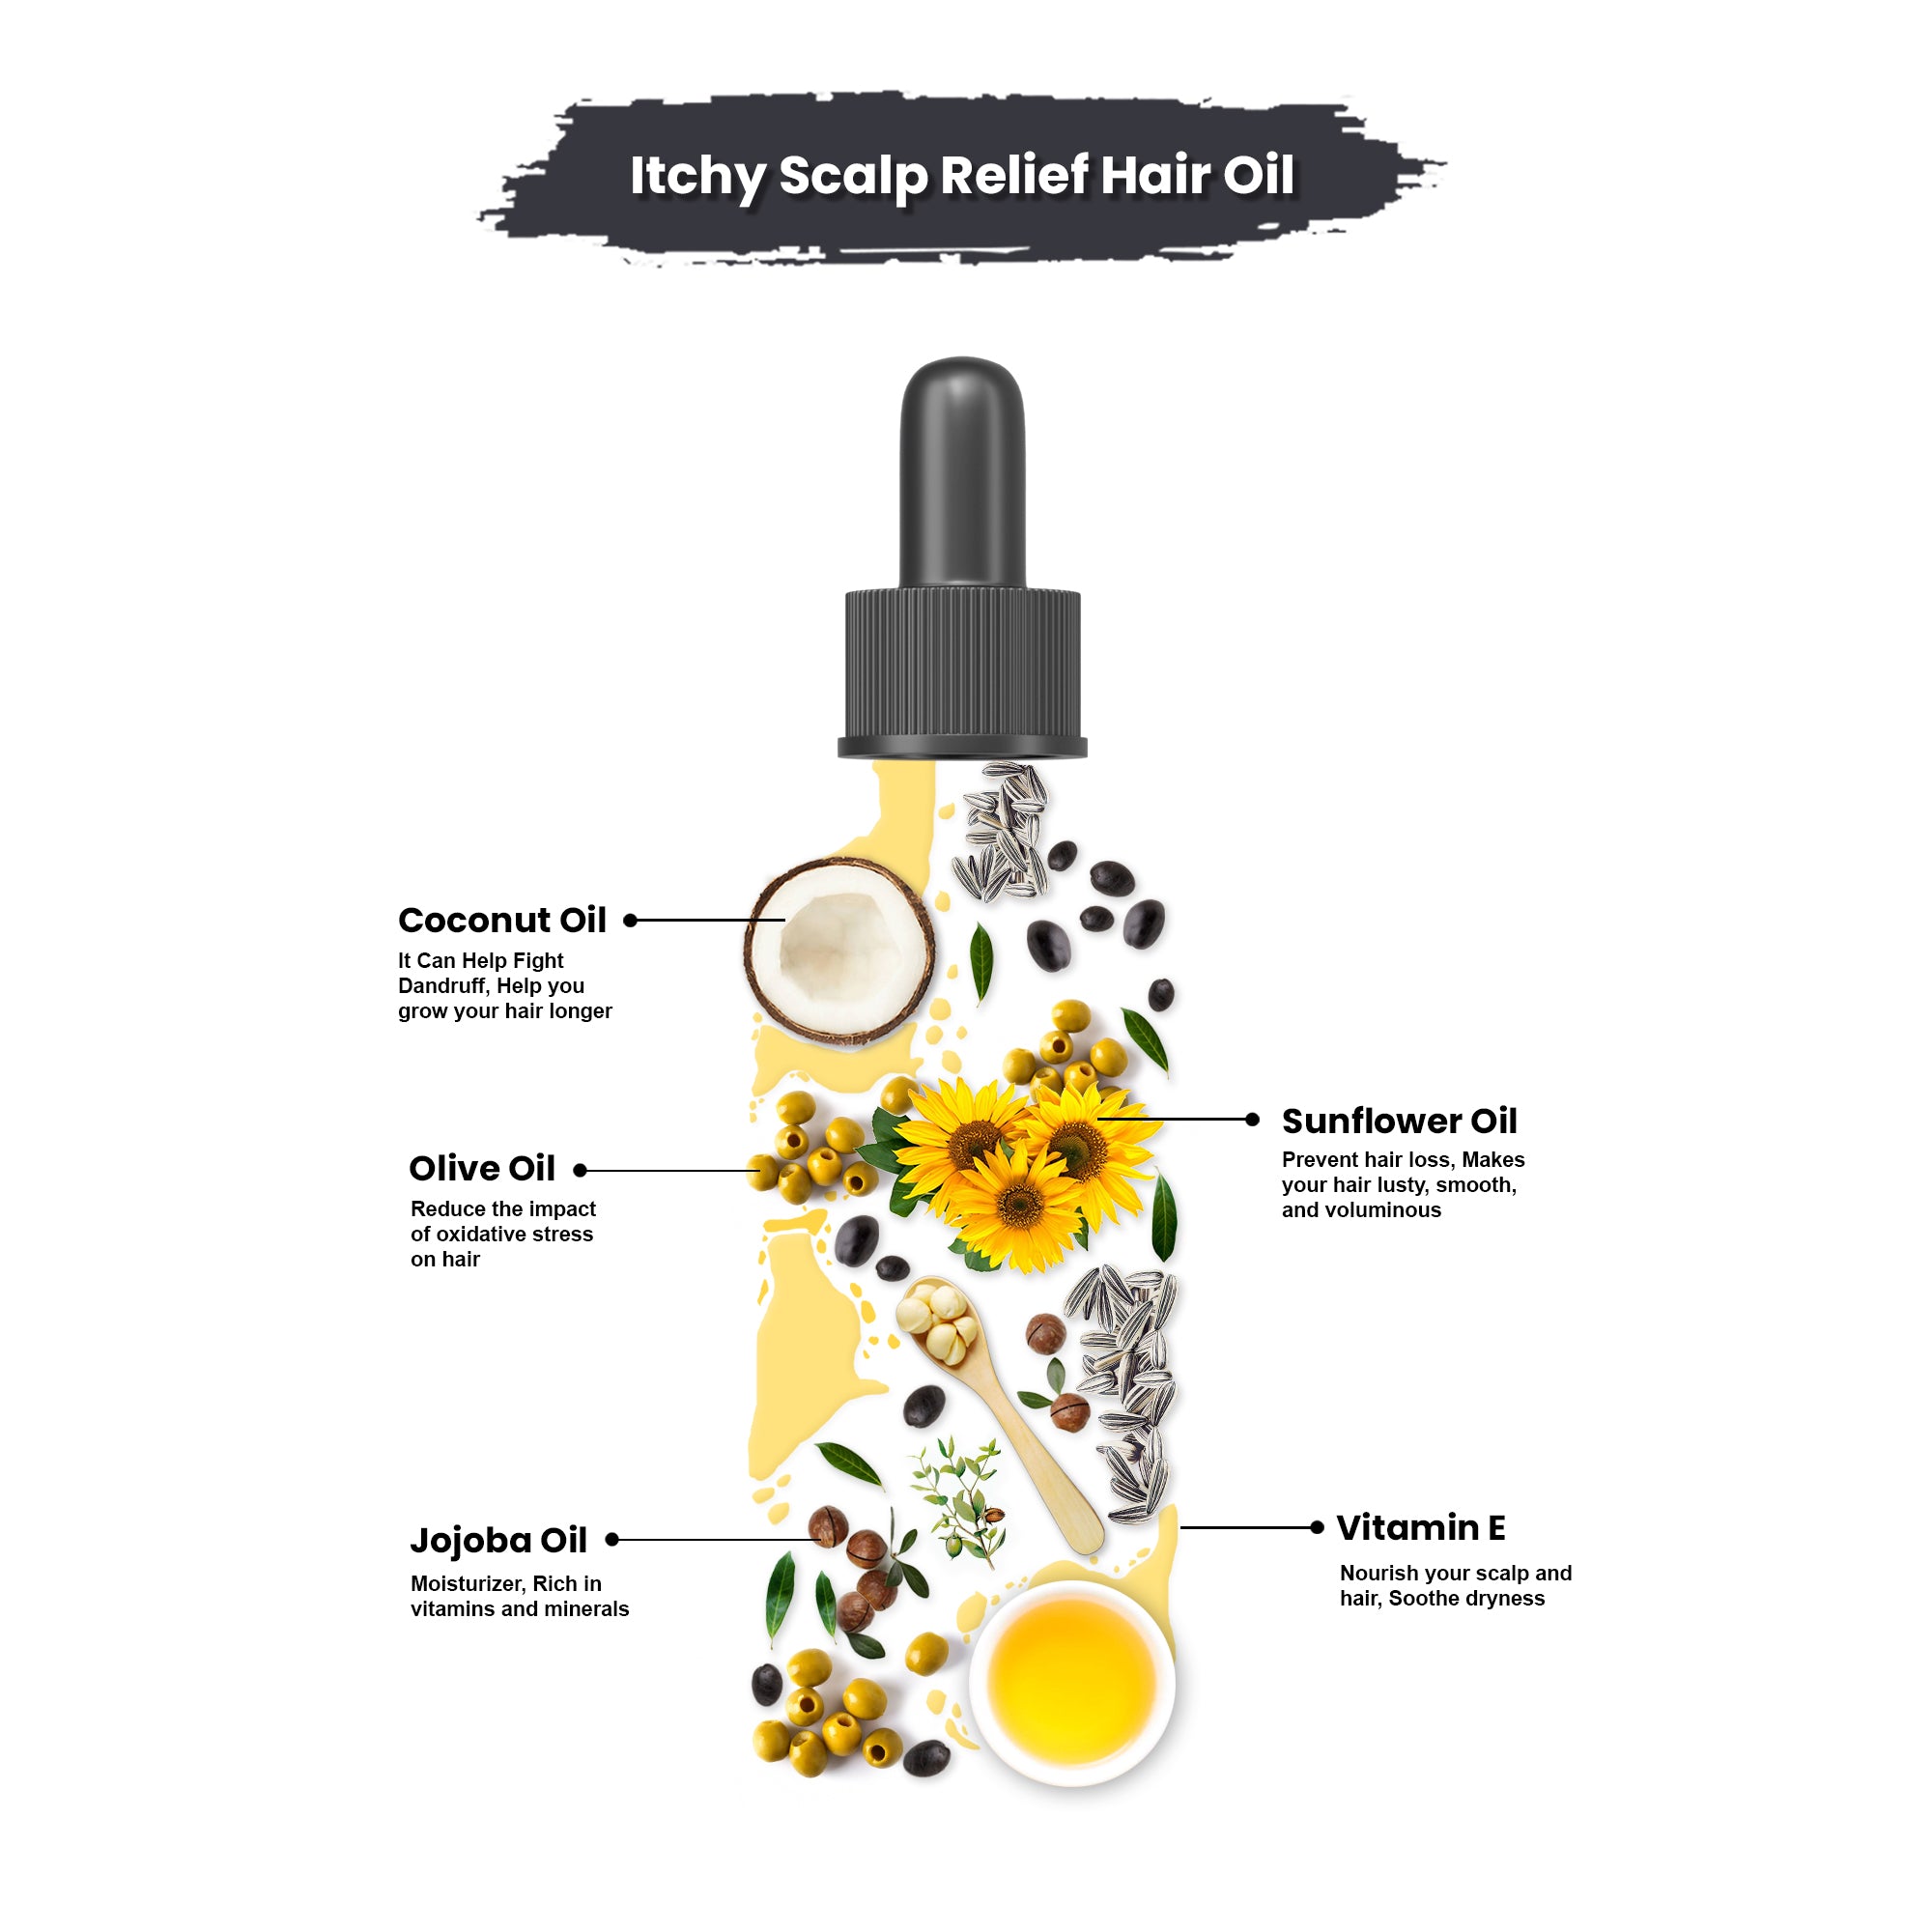 ITCHY SCALP RELIEF HAIR OIL